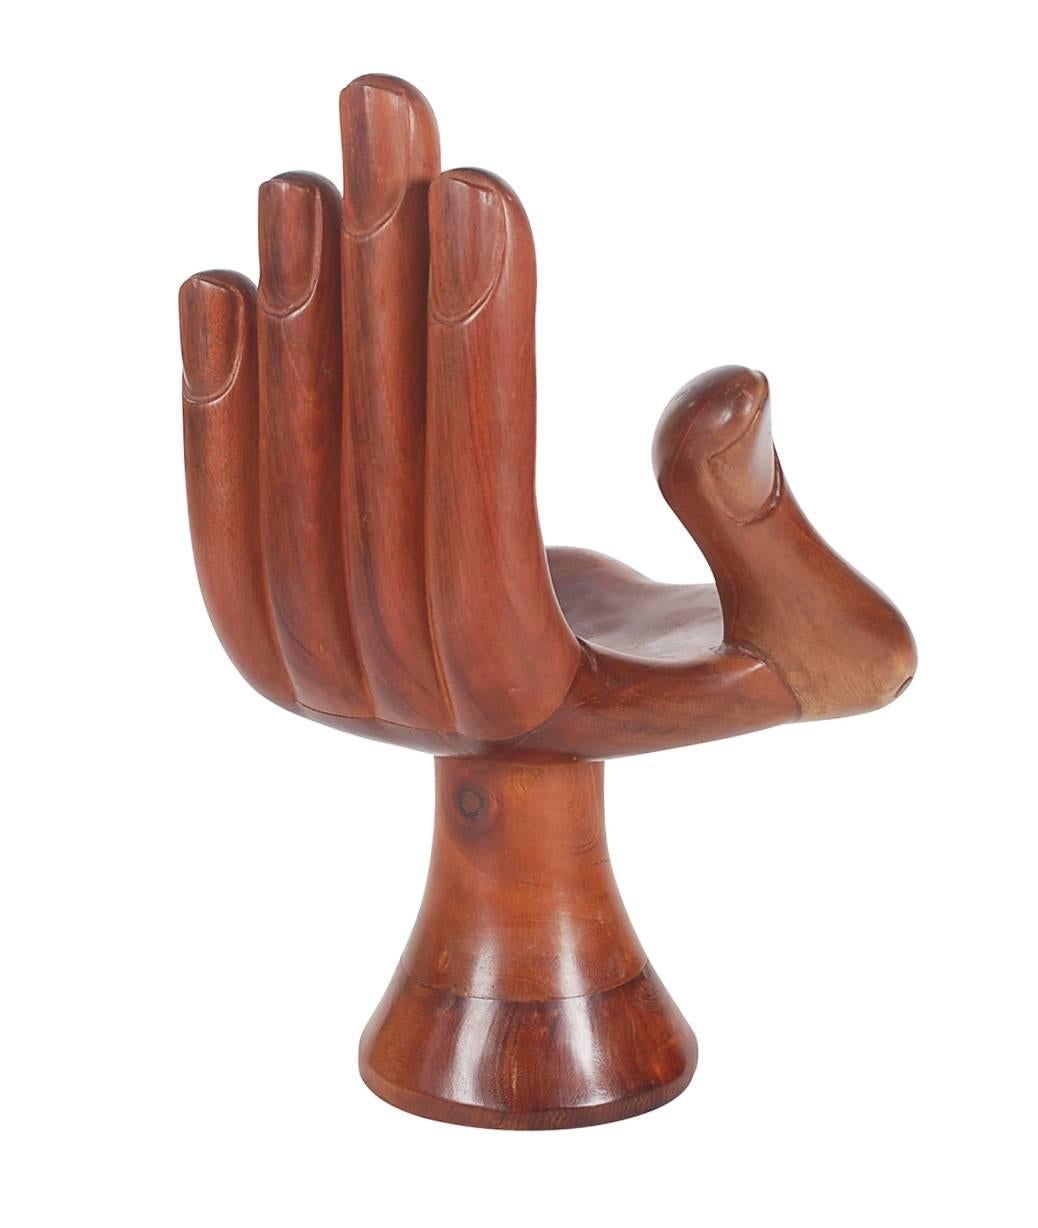 An iconic hand form sculpture after Pedro Friedeberg. It features solid mahogany construction. Unmarked.